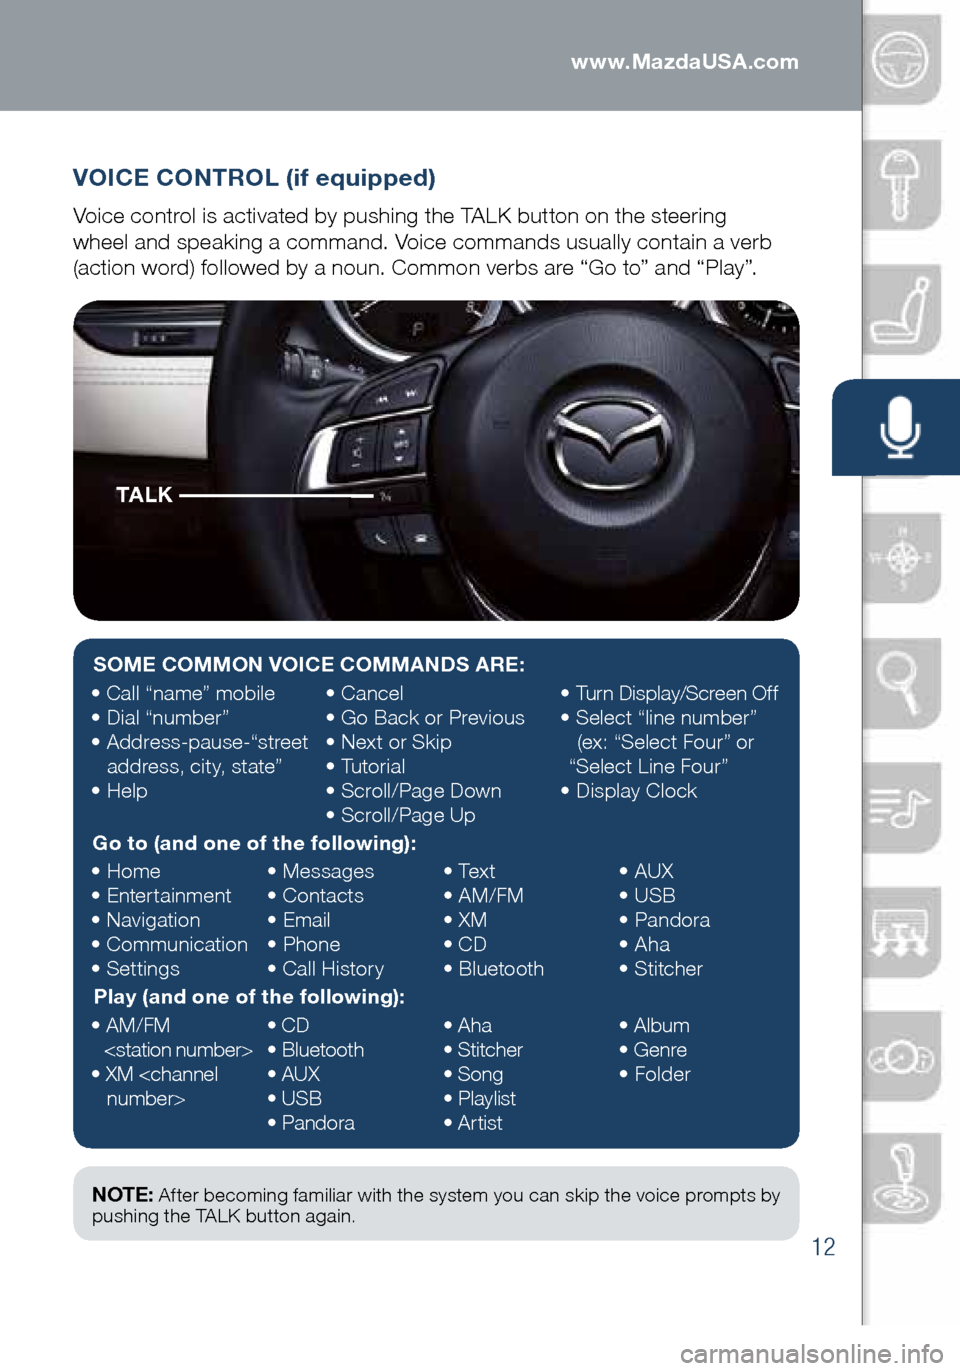 MAZDA MODEL 6 2016  Smart Start Guide (in English) 12
VOICE CONTROL (if equipped)
Voice control is activated by pushing the TALK button on the steering   
wheel and speaking a command. Voice commands usually contain a verb 
(action word) followed by a